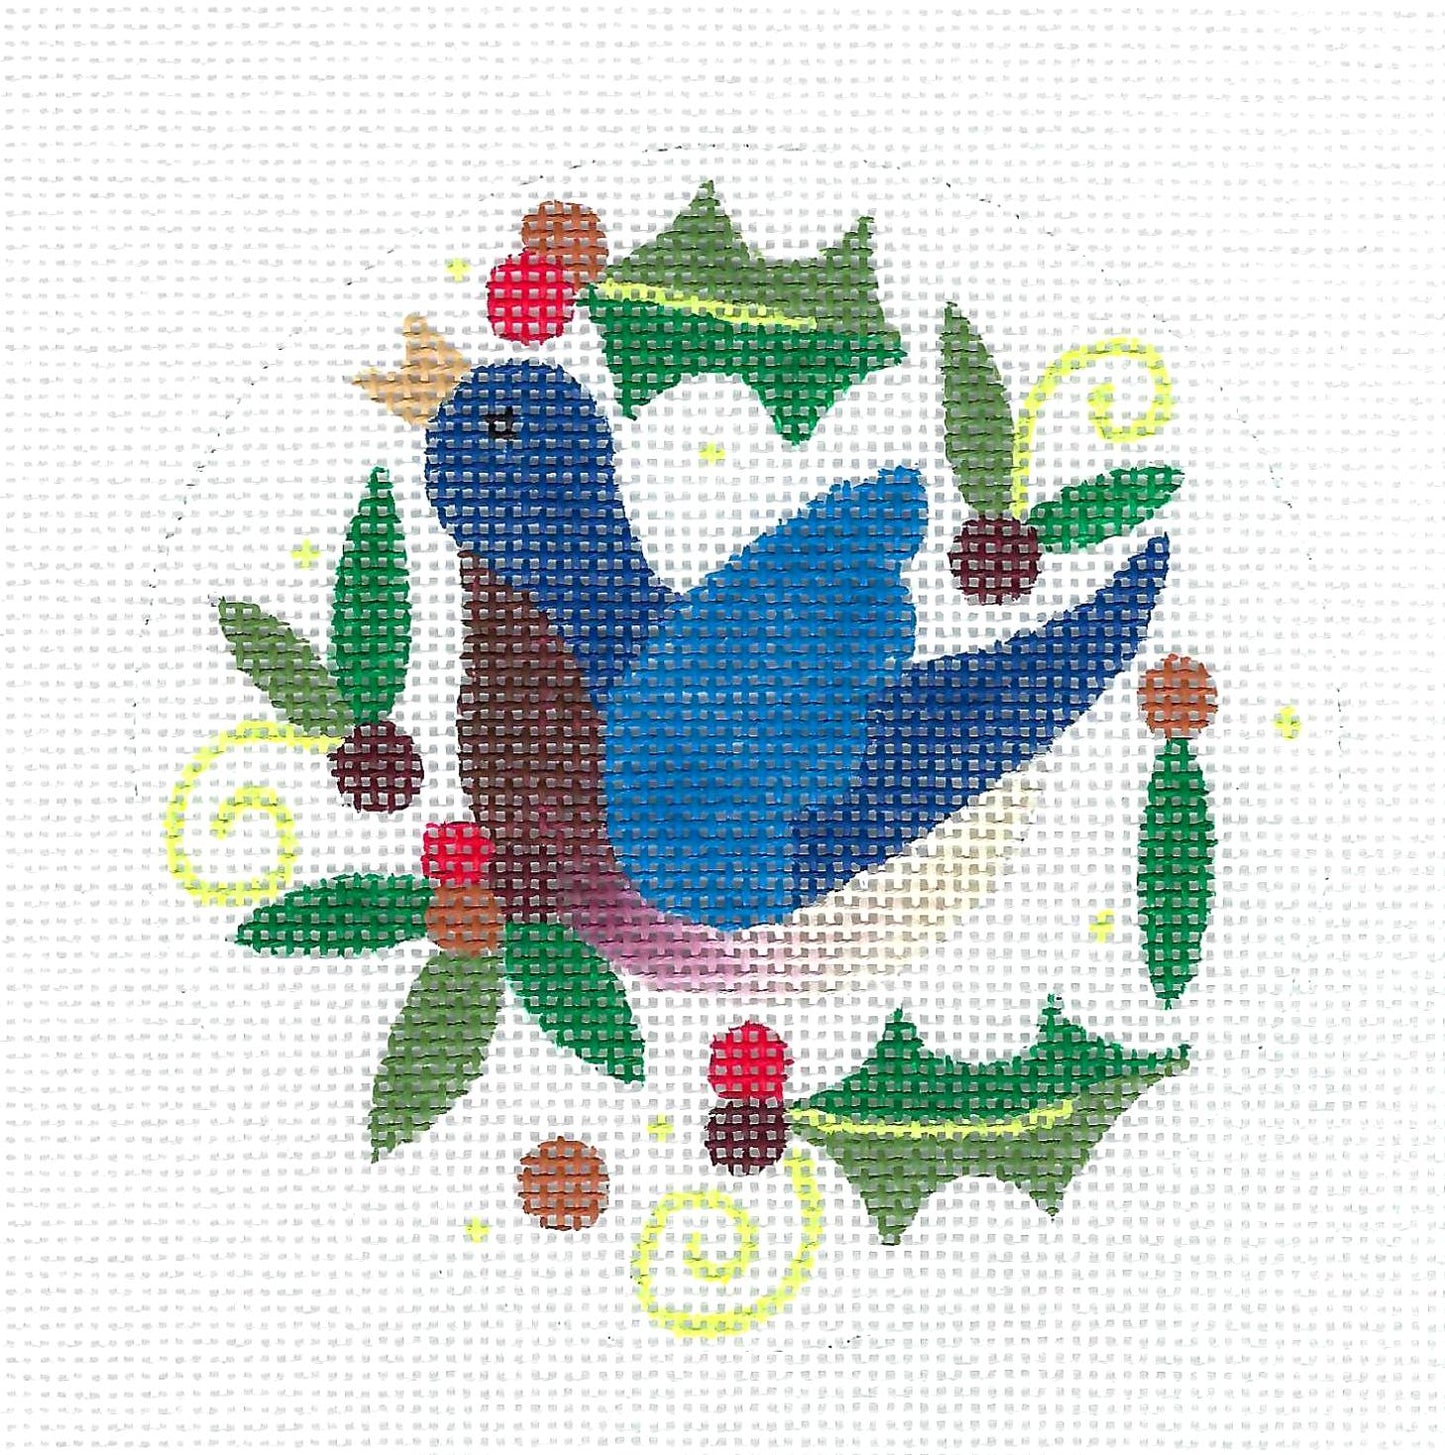 12 Days of Christmas ~ Four Calling Birds 4" Round handpainted Needlepoint Canvas by Raymond Crawford